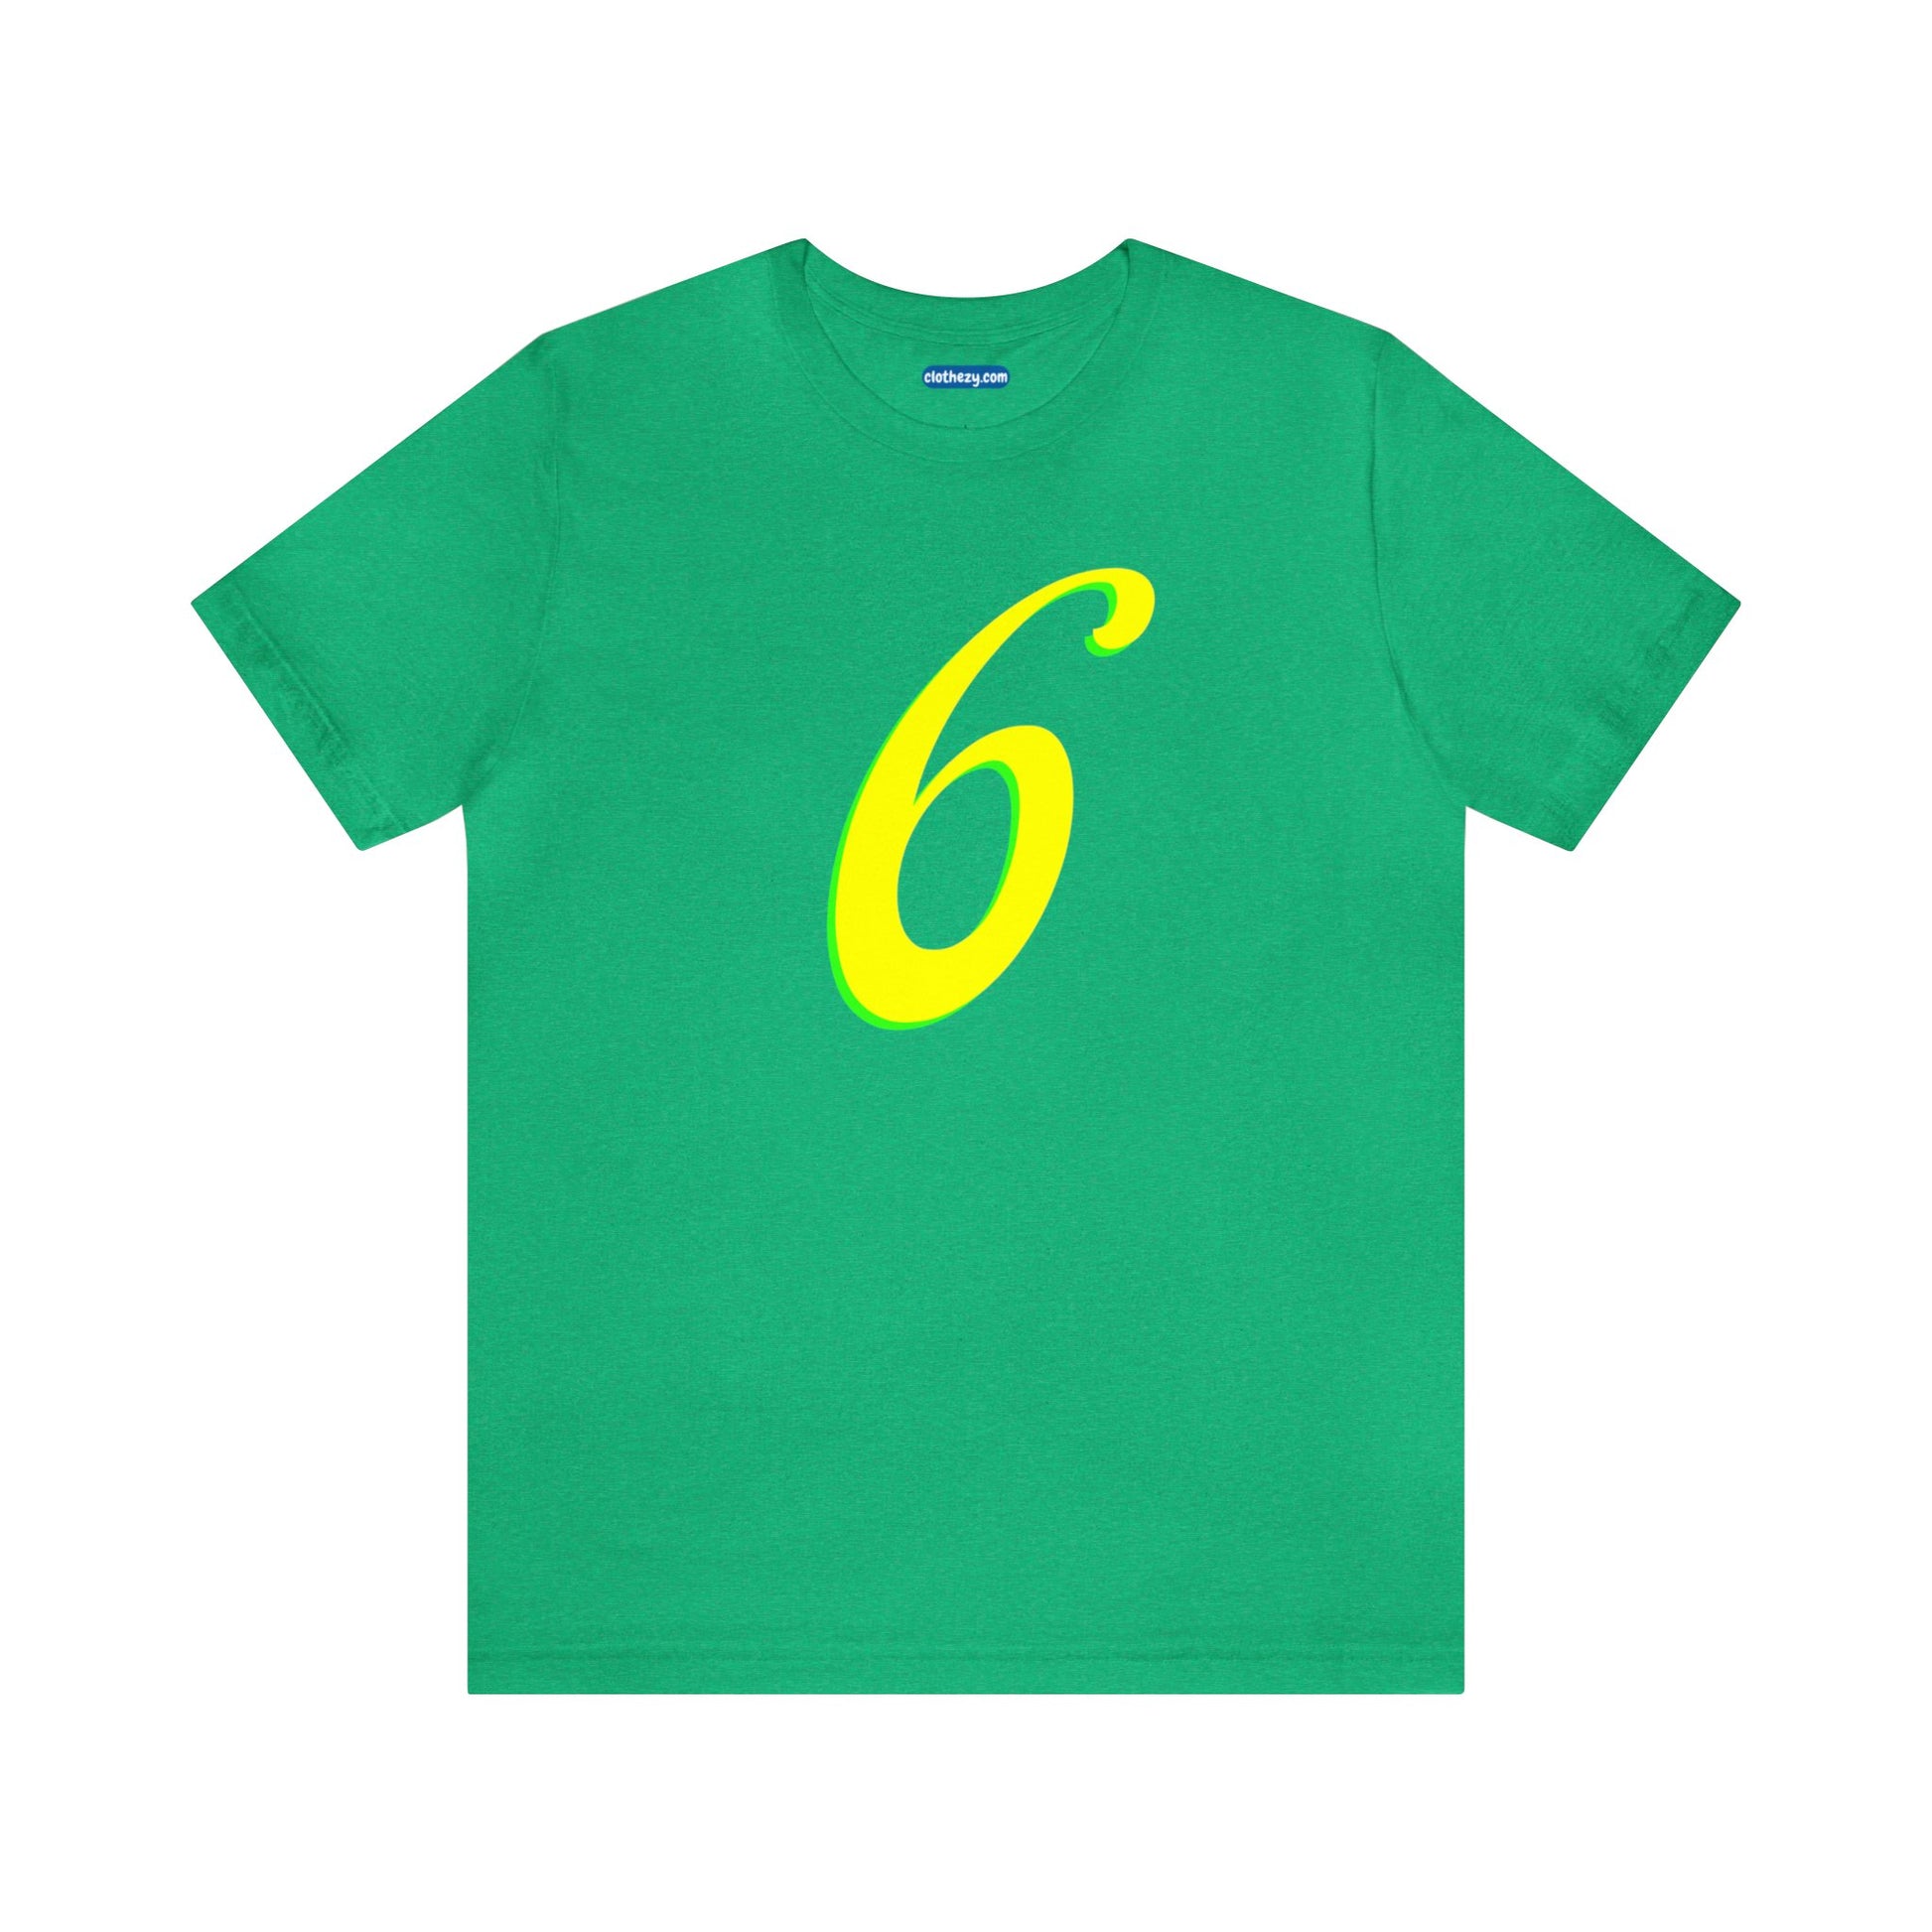 Number 6 Design - Soft Cotton Tee for birthdays and celebrations, Gift for friends and family, Multiple Options by clothezy.com in Royal Blue Heather Size Small - Buy Now